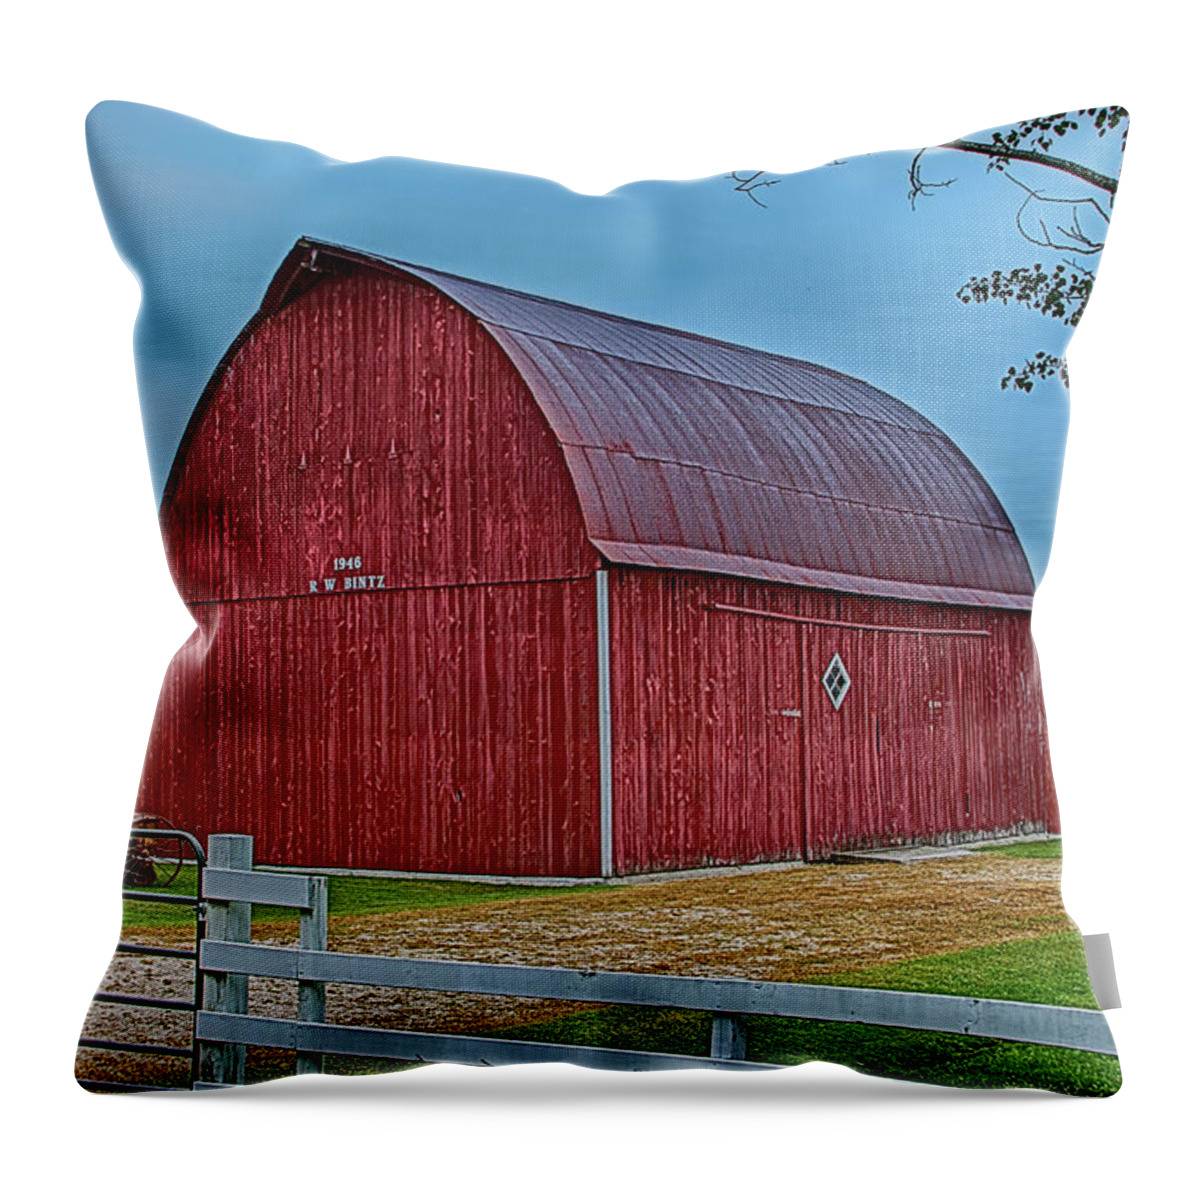 Cross Village Throw Pillow featuring the photograph Big Red Barn at Cross Village by Bill Gallagher